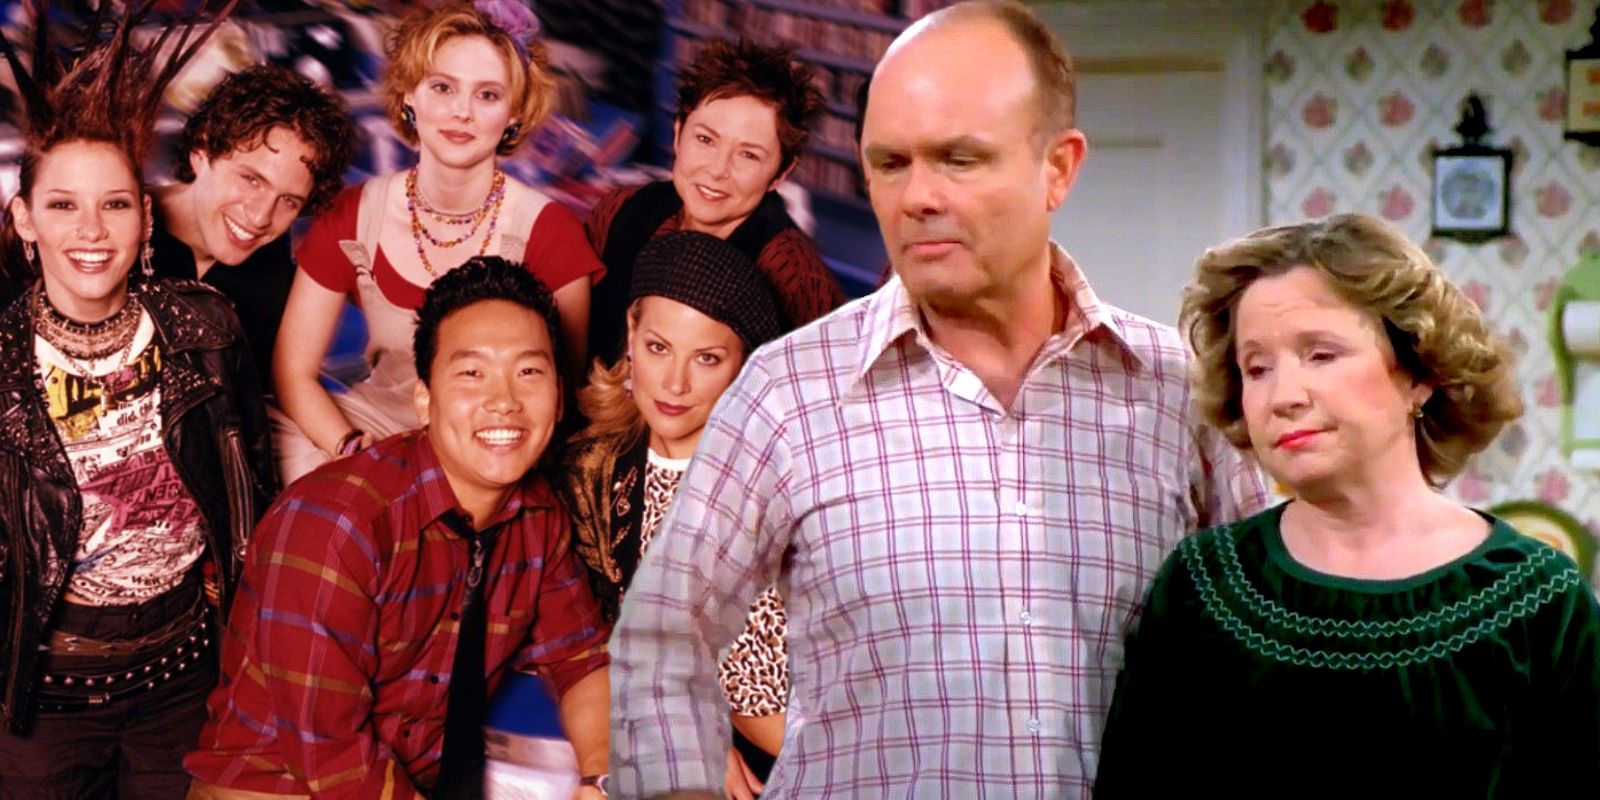 That '90s Show Can Learn One Thing From The Failed '80s Show Spinoff